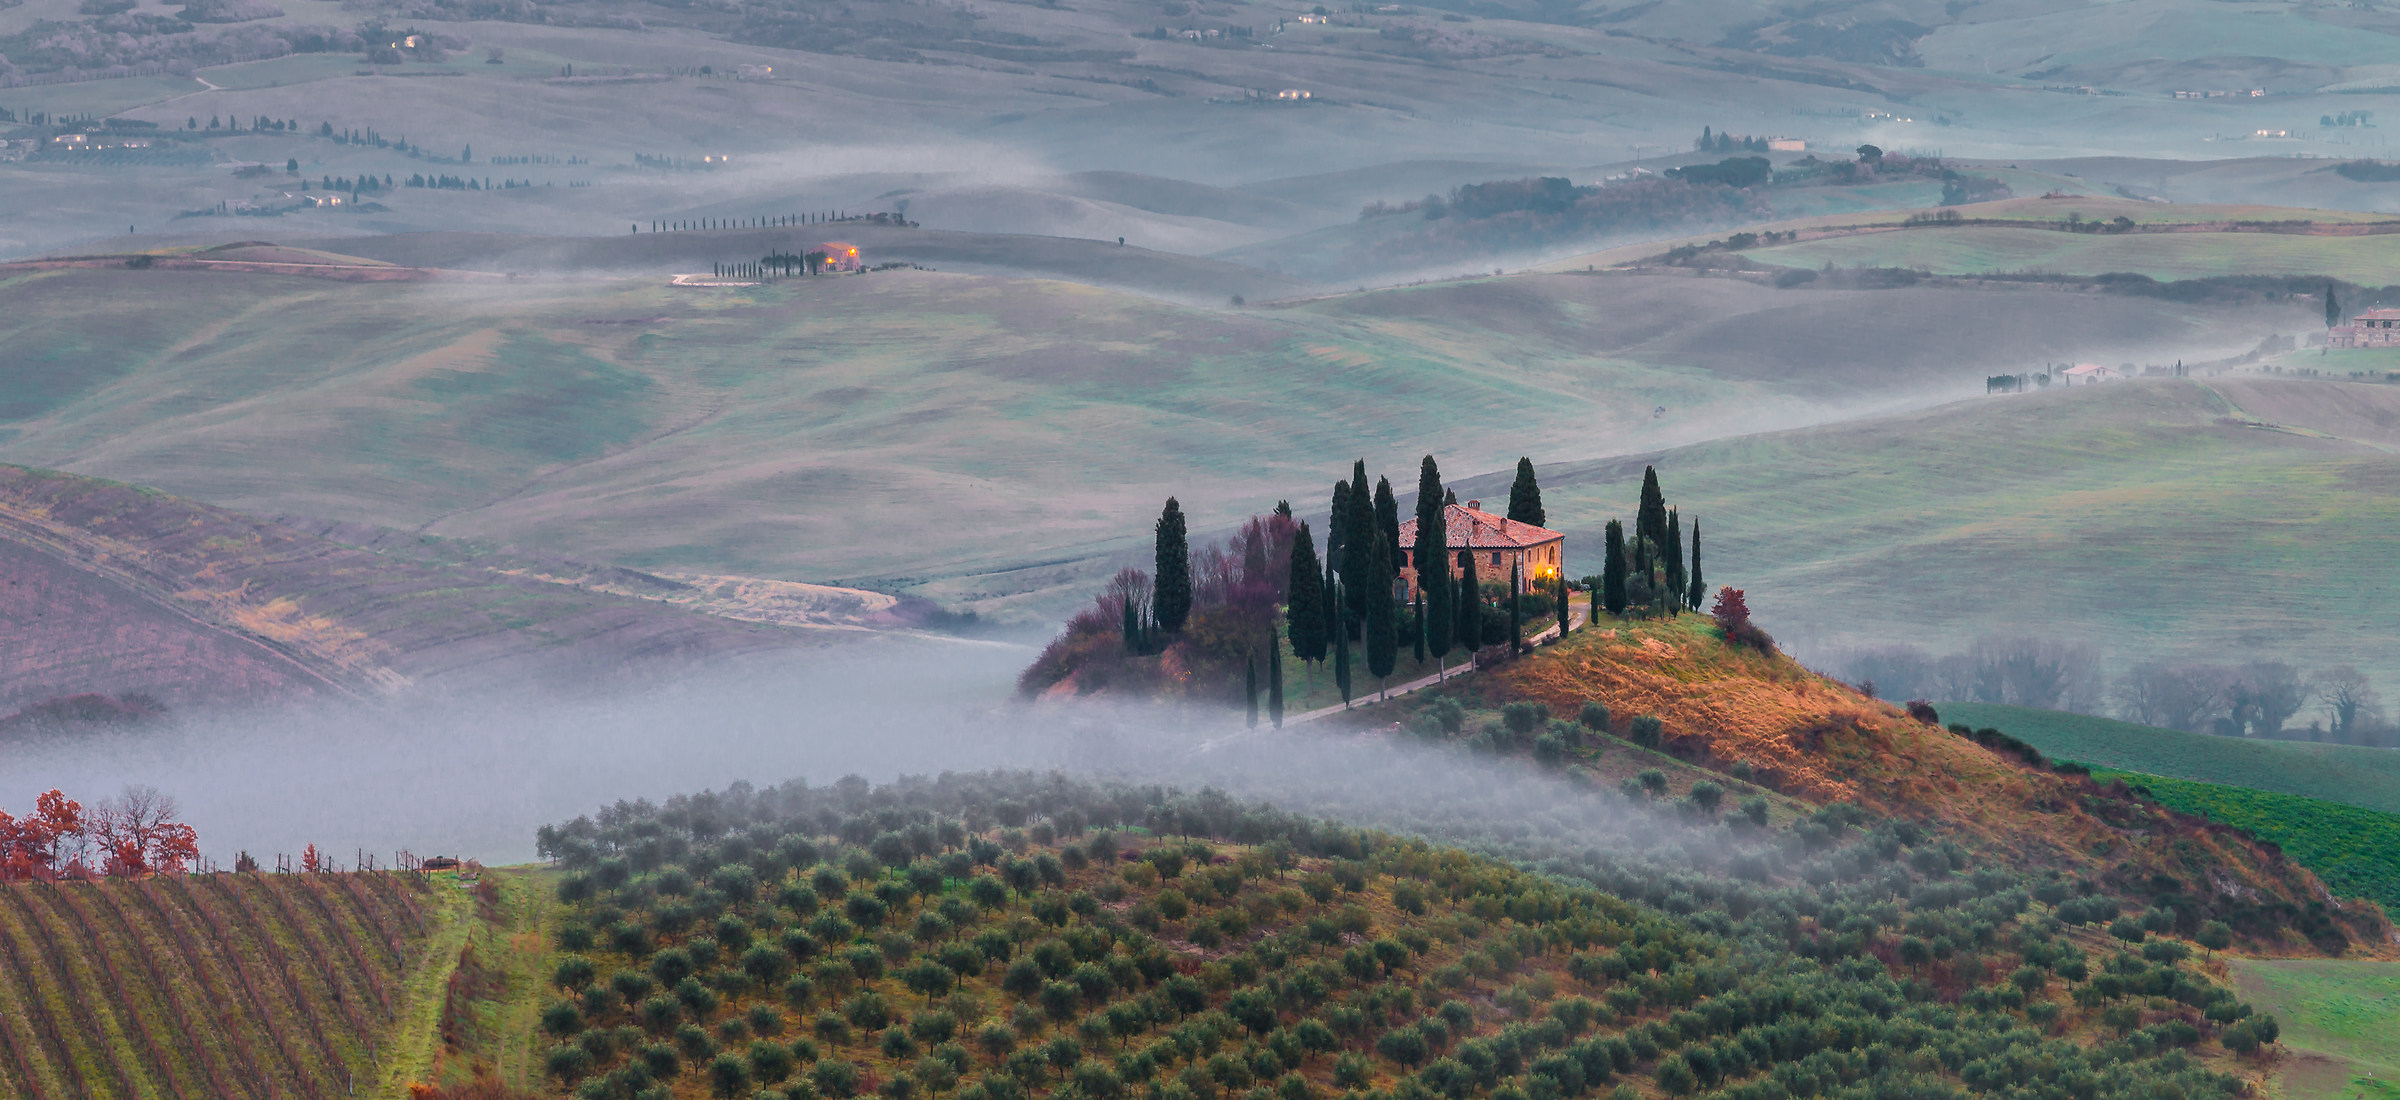 Sunrise in Val d'Orcia...